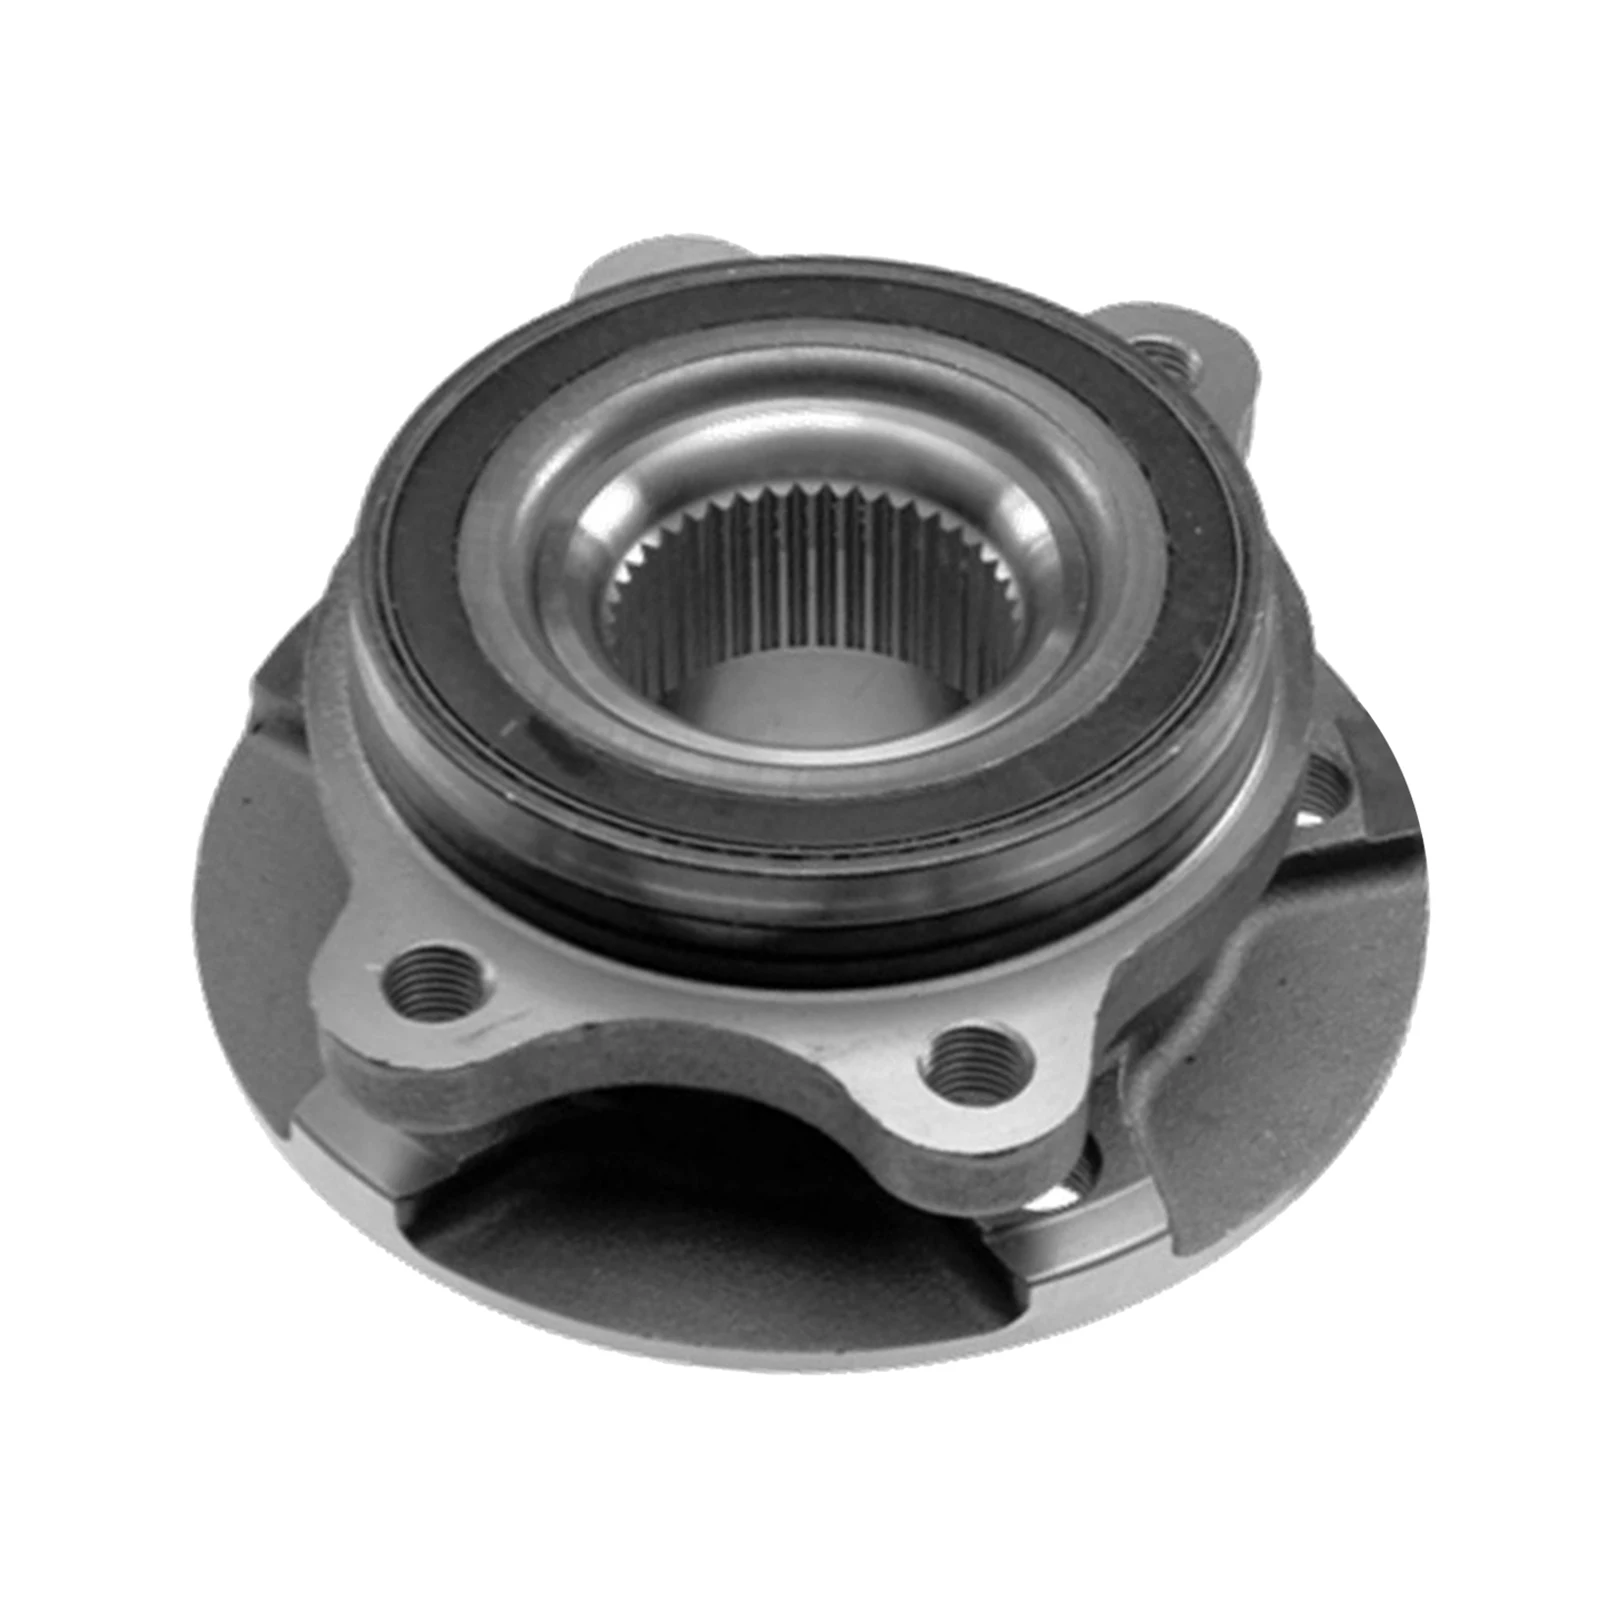 Front Left & Right Wheel Bearing Hub Assembly Fit for Audi A4 2009-2015 A5 2010-2014 A6 2012-2015 2009-2015 2010-2015 2008-2015